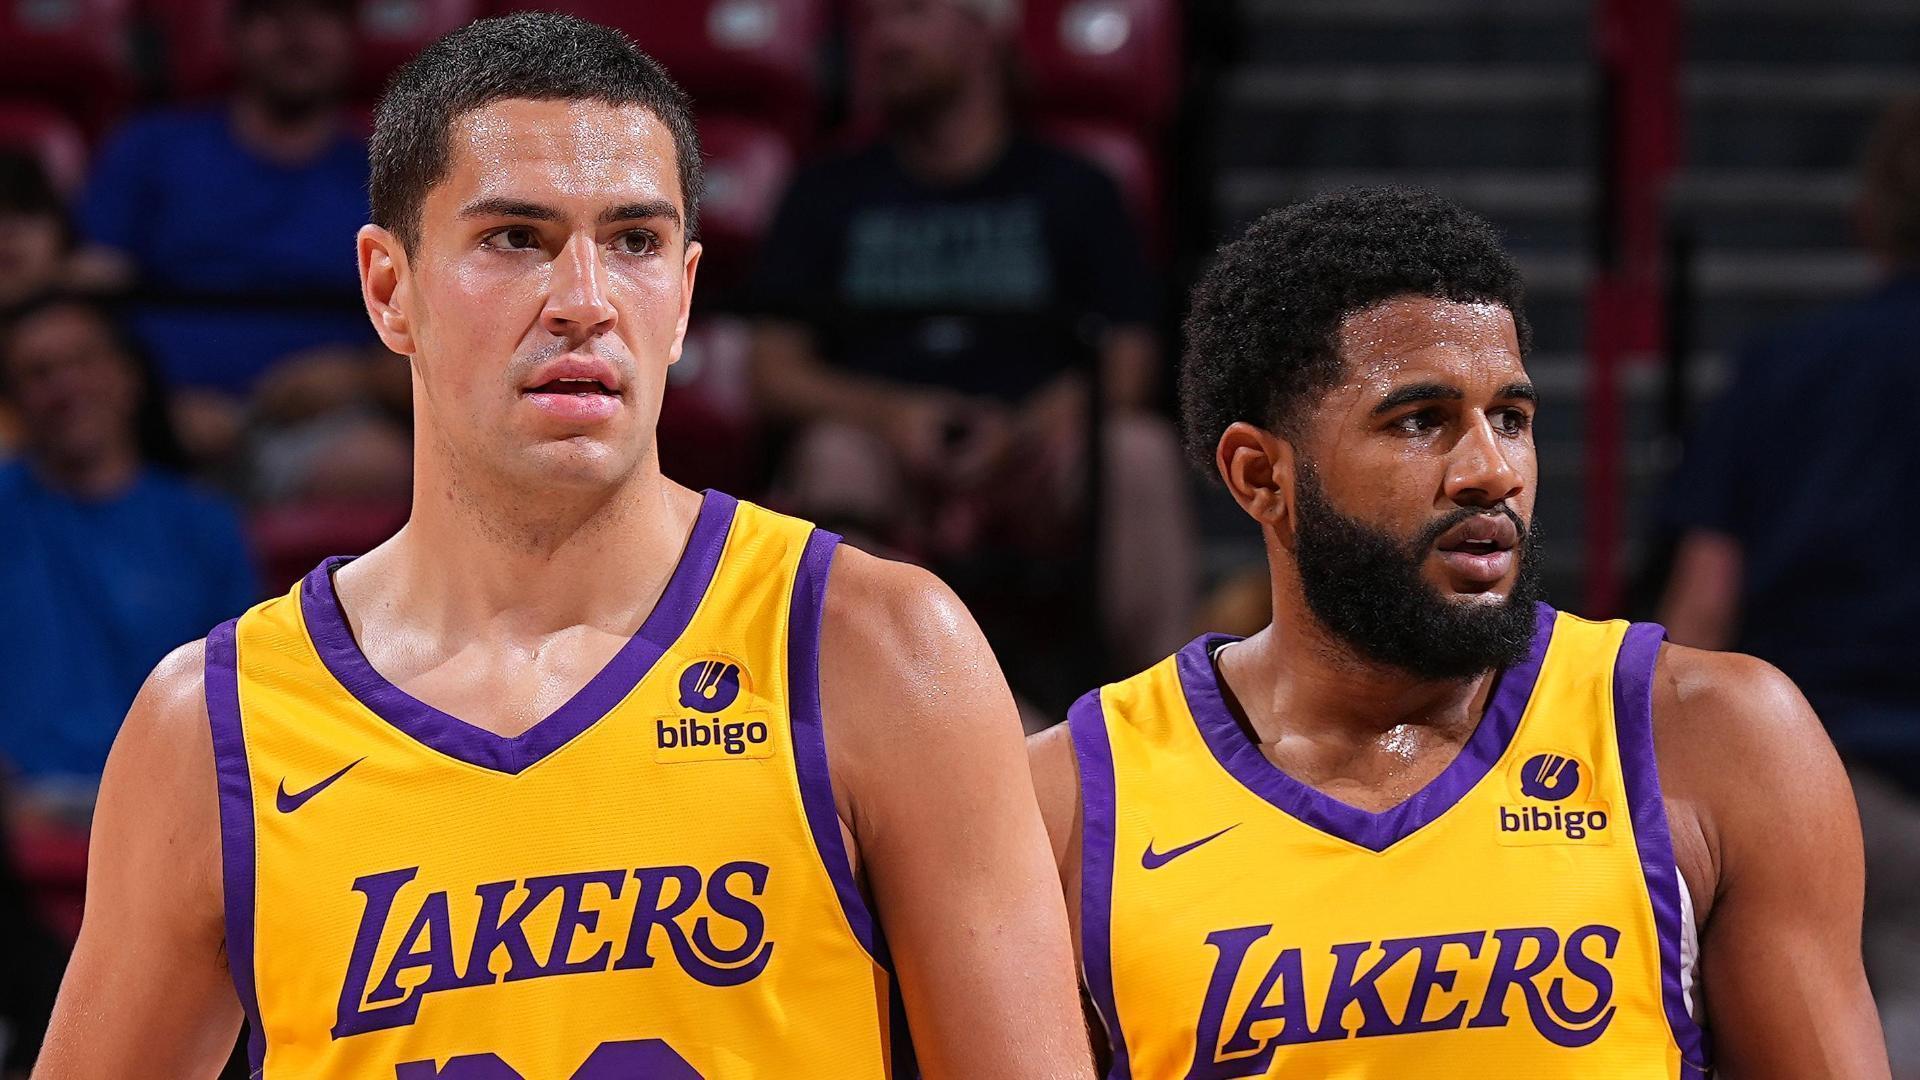 Clippers vs Lakers Live: Clippers vs Lakers: Final score and